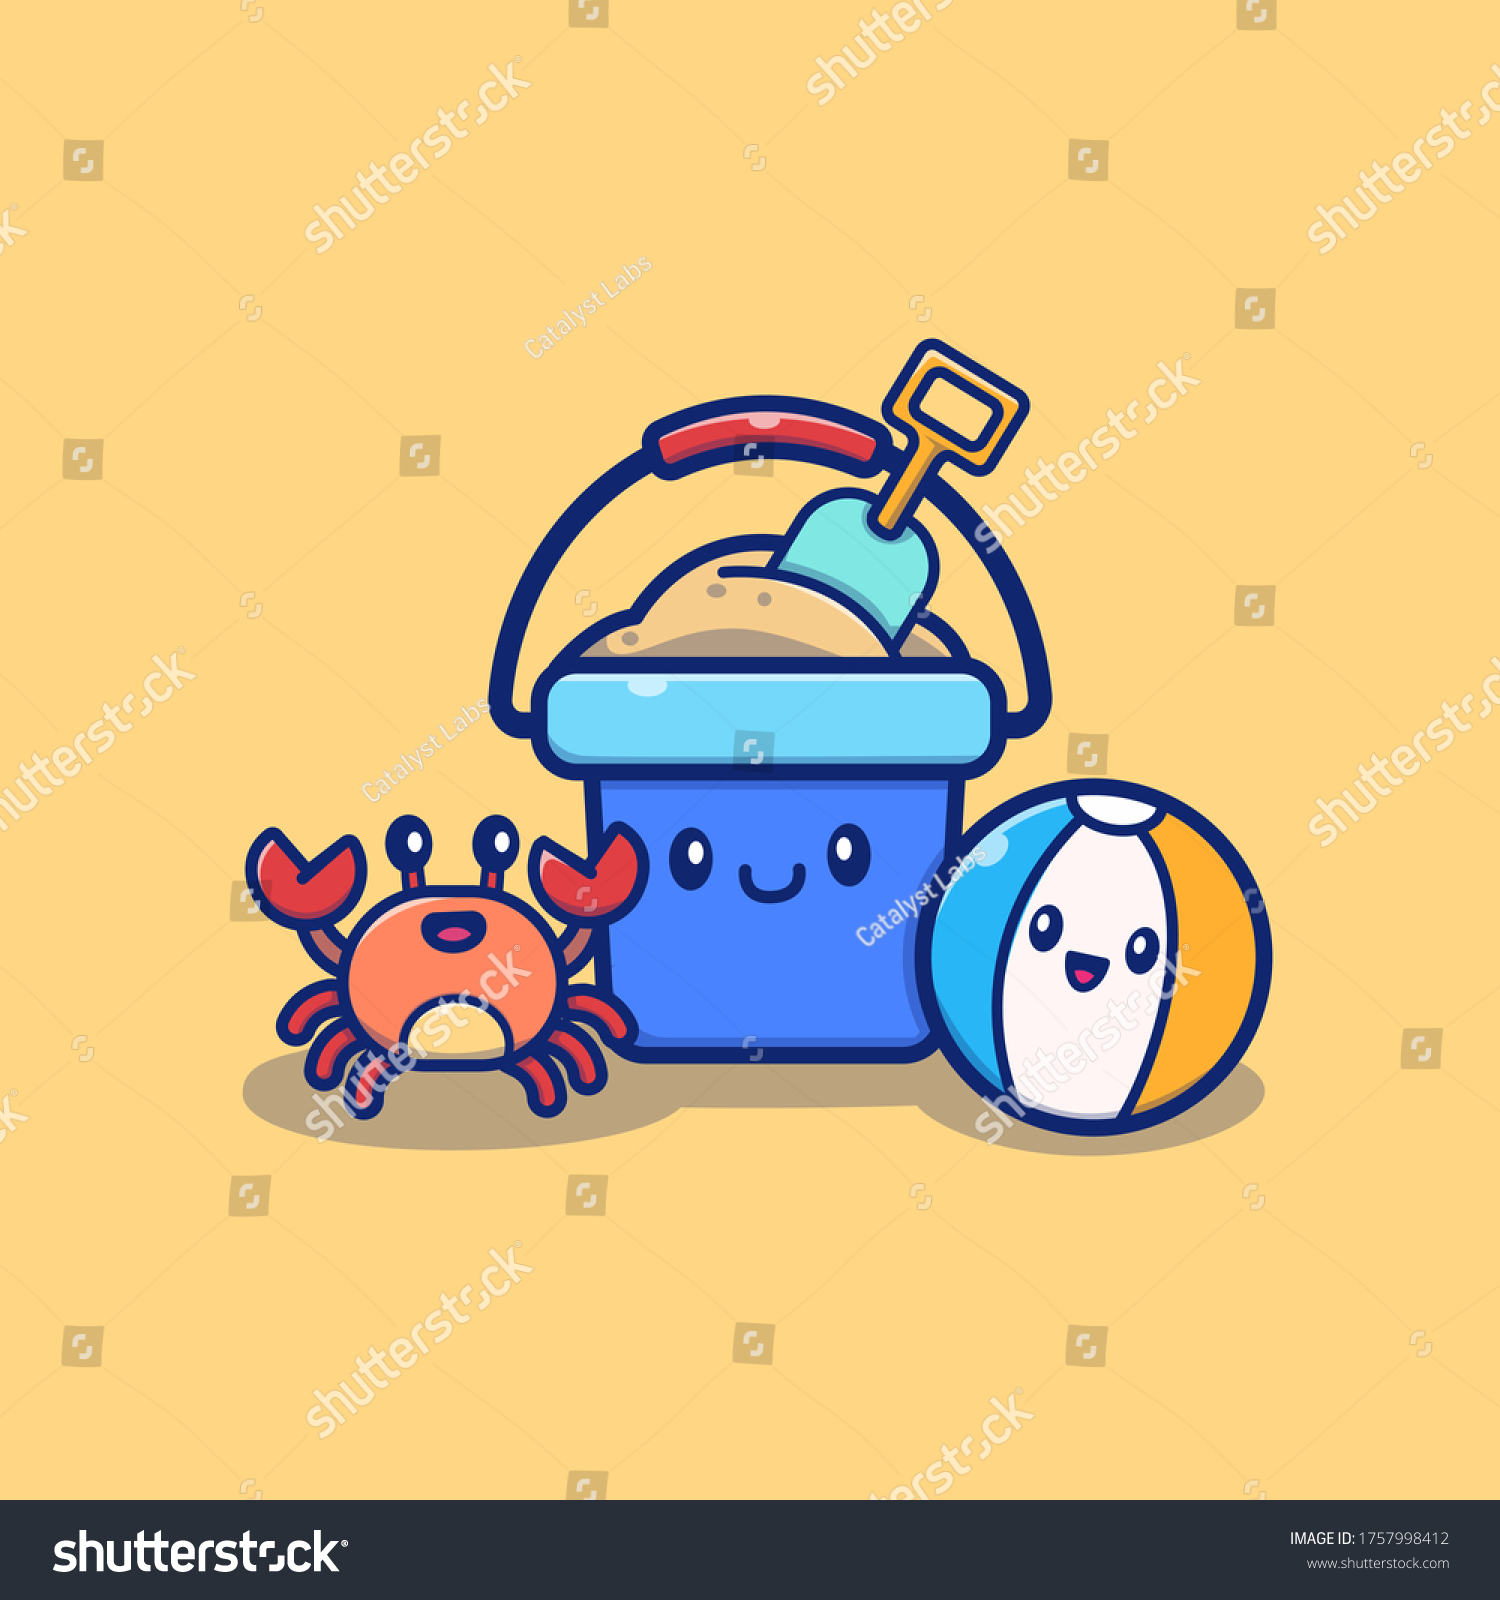 SVG of Cute Summer Bucket Sand With Crab And Ball Cartoon Vector Icon Illustration. Summer Icon Concept Isolated Premium Vector. Flat Cartoon Style  svg